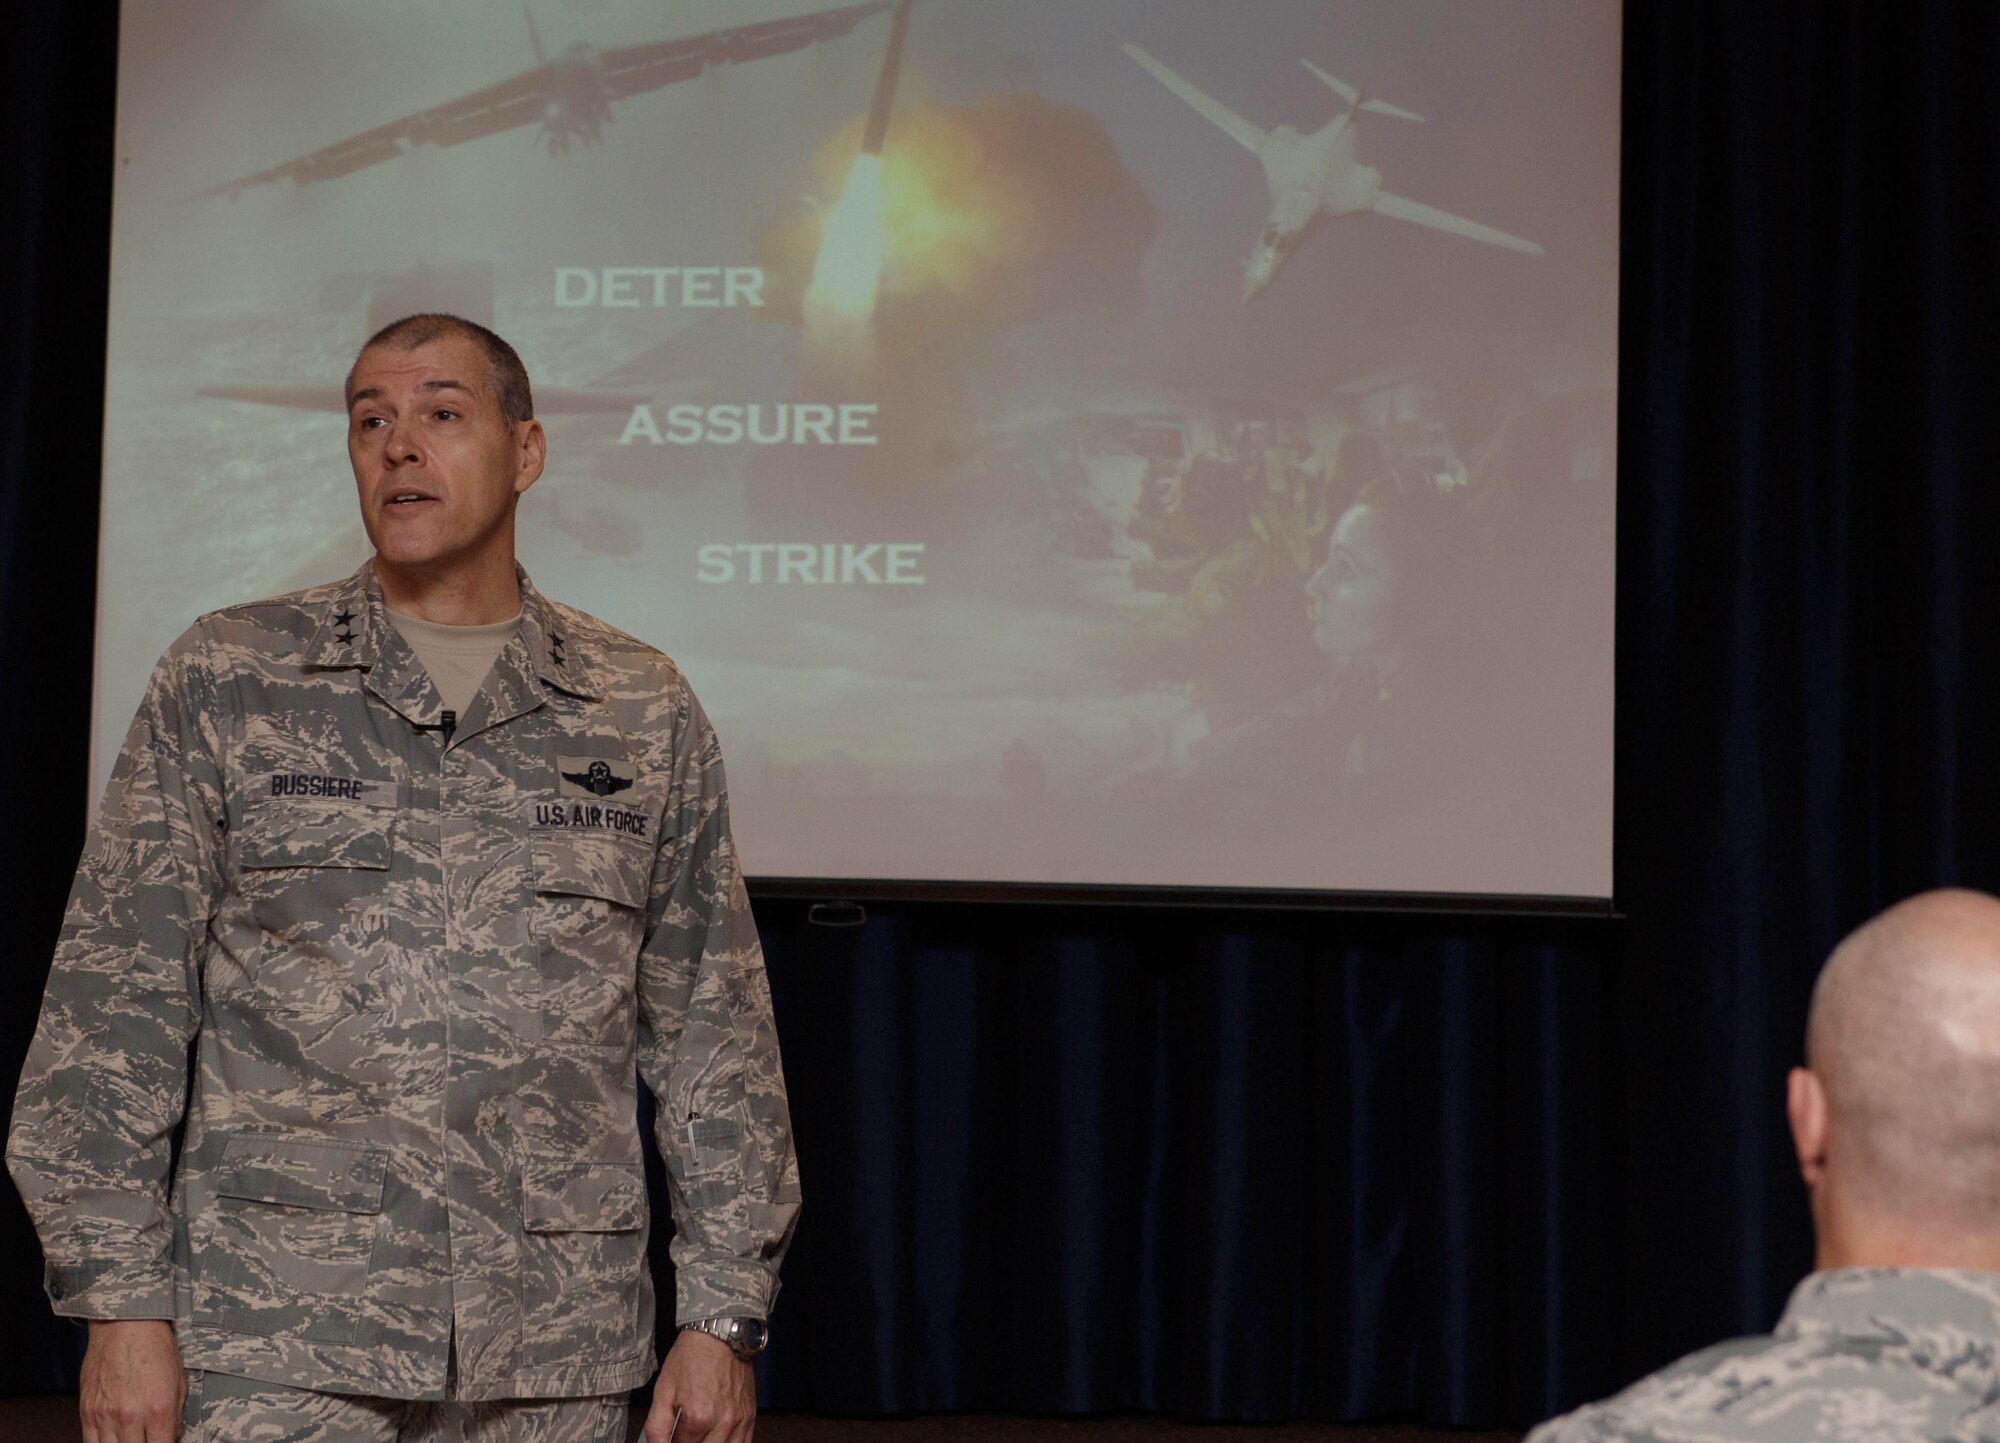 Eighth Air Force and J-GSOC commander Maj. Gen. Thomas Bussiere speaks to Airmen about bomber operations for 2018 and recaps the past year's successes.